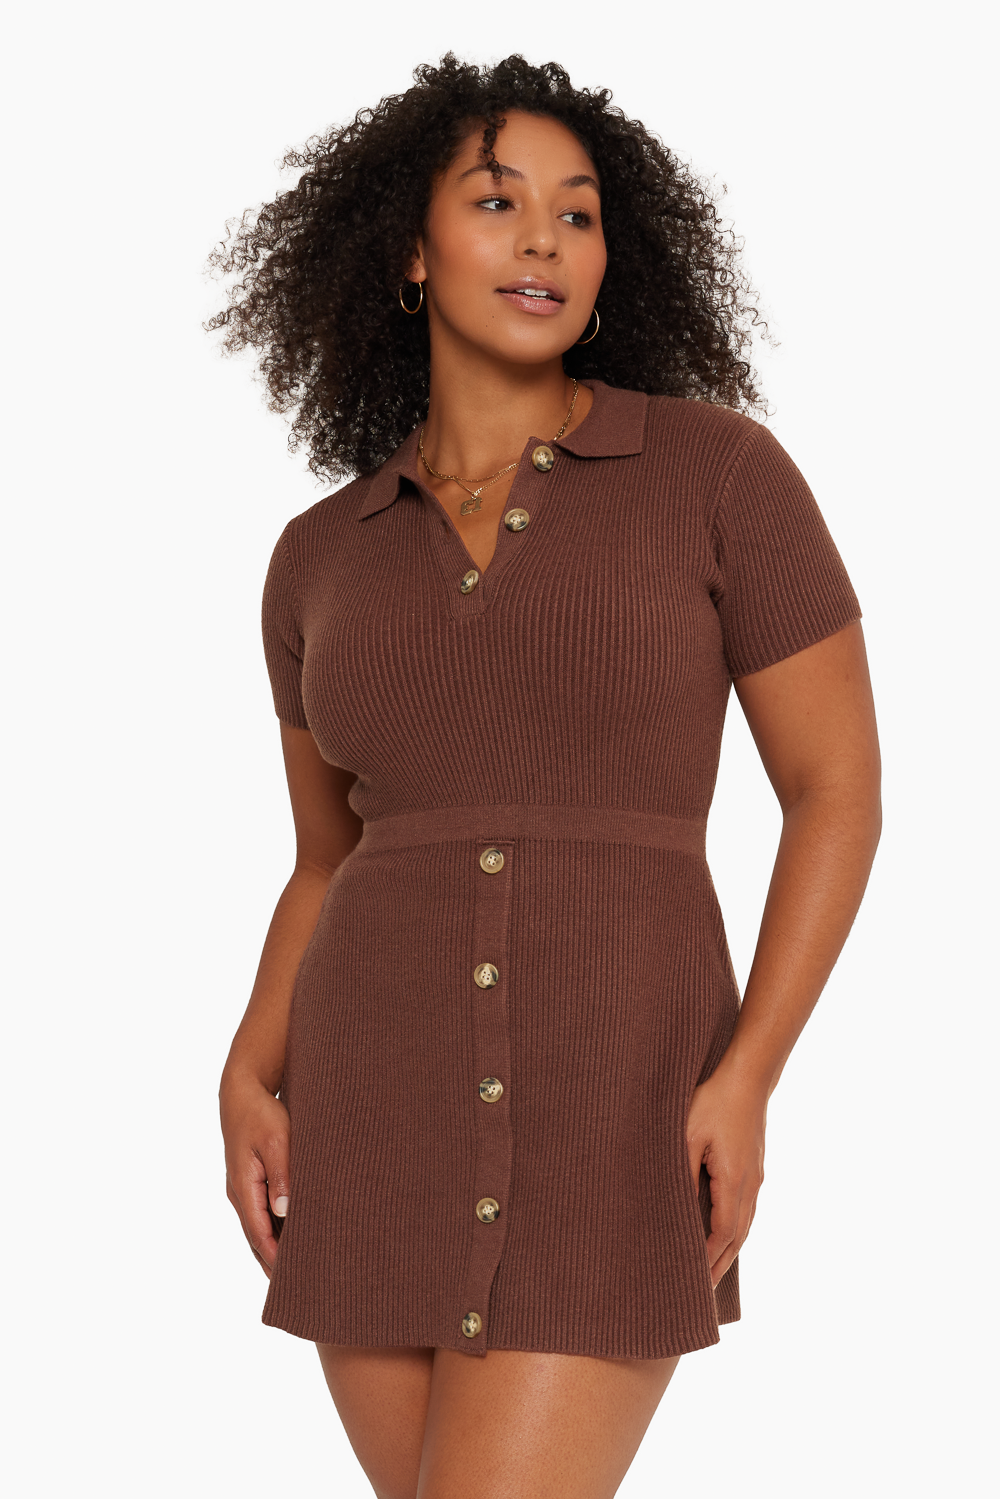 SET™ POLO KNIT DRESS IN CHOCOLATE